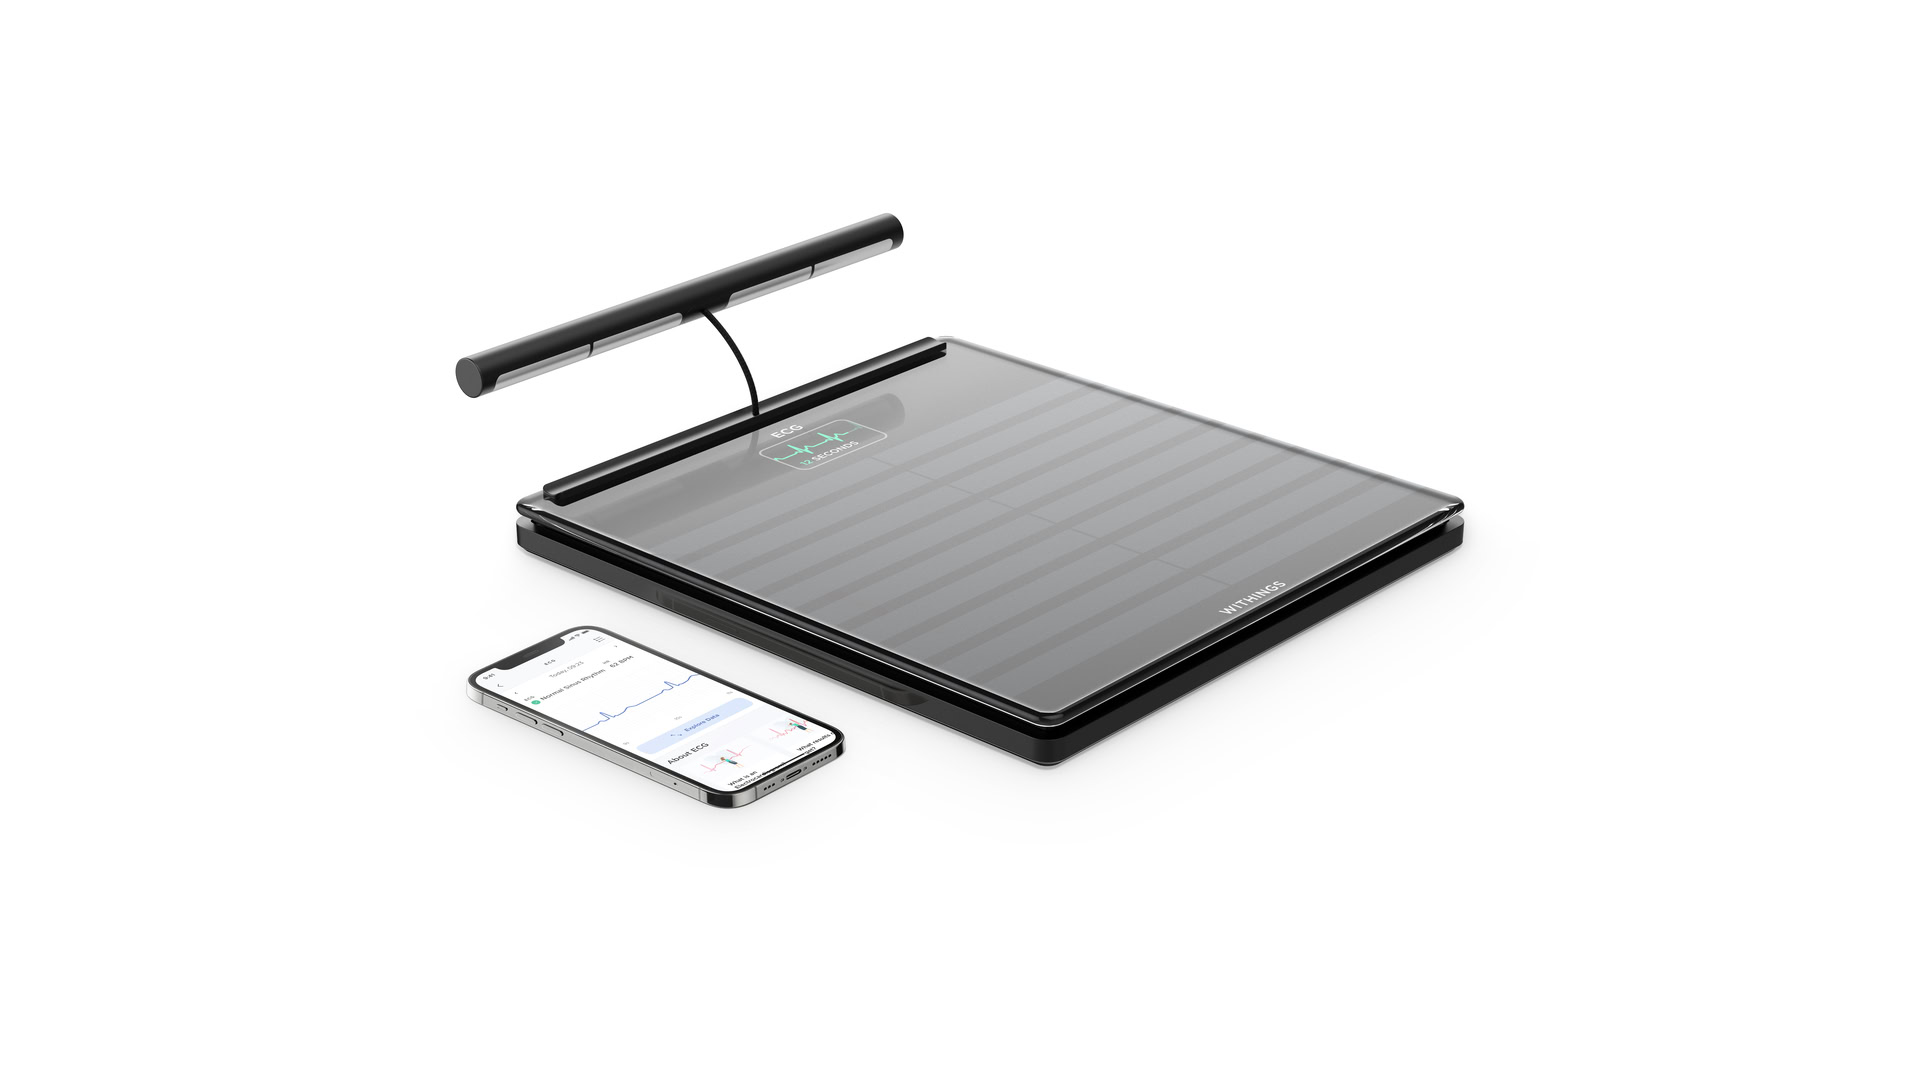 Withings Body + Smart Scale Review: Caveats